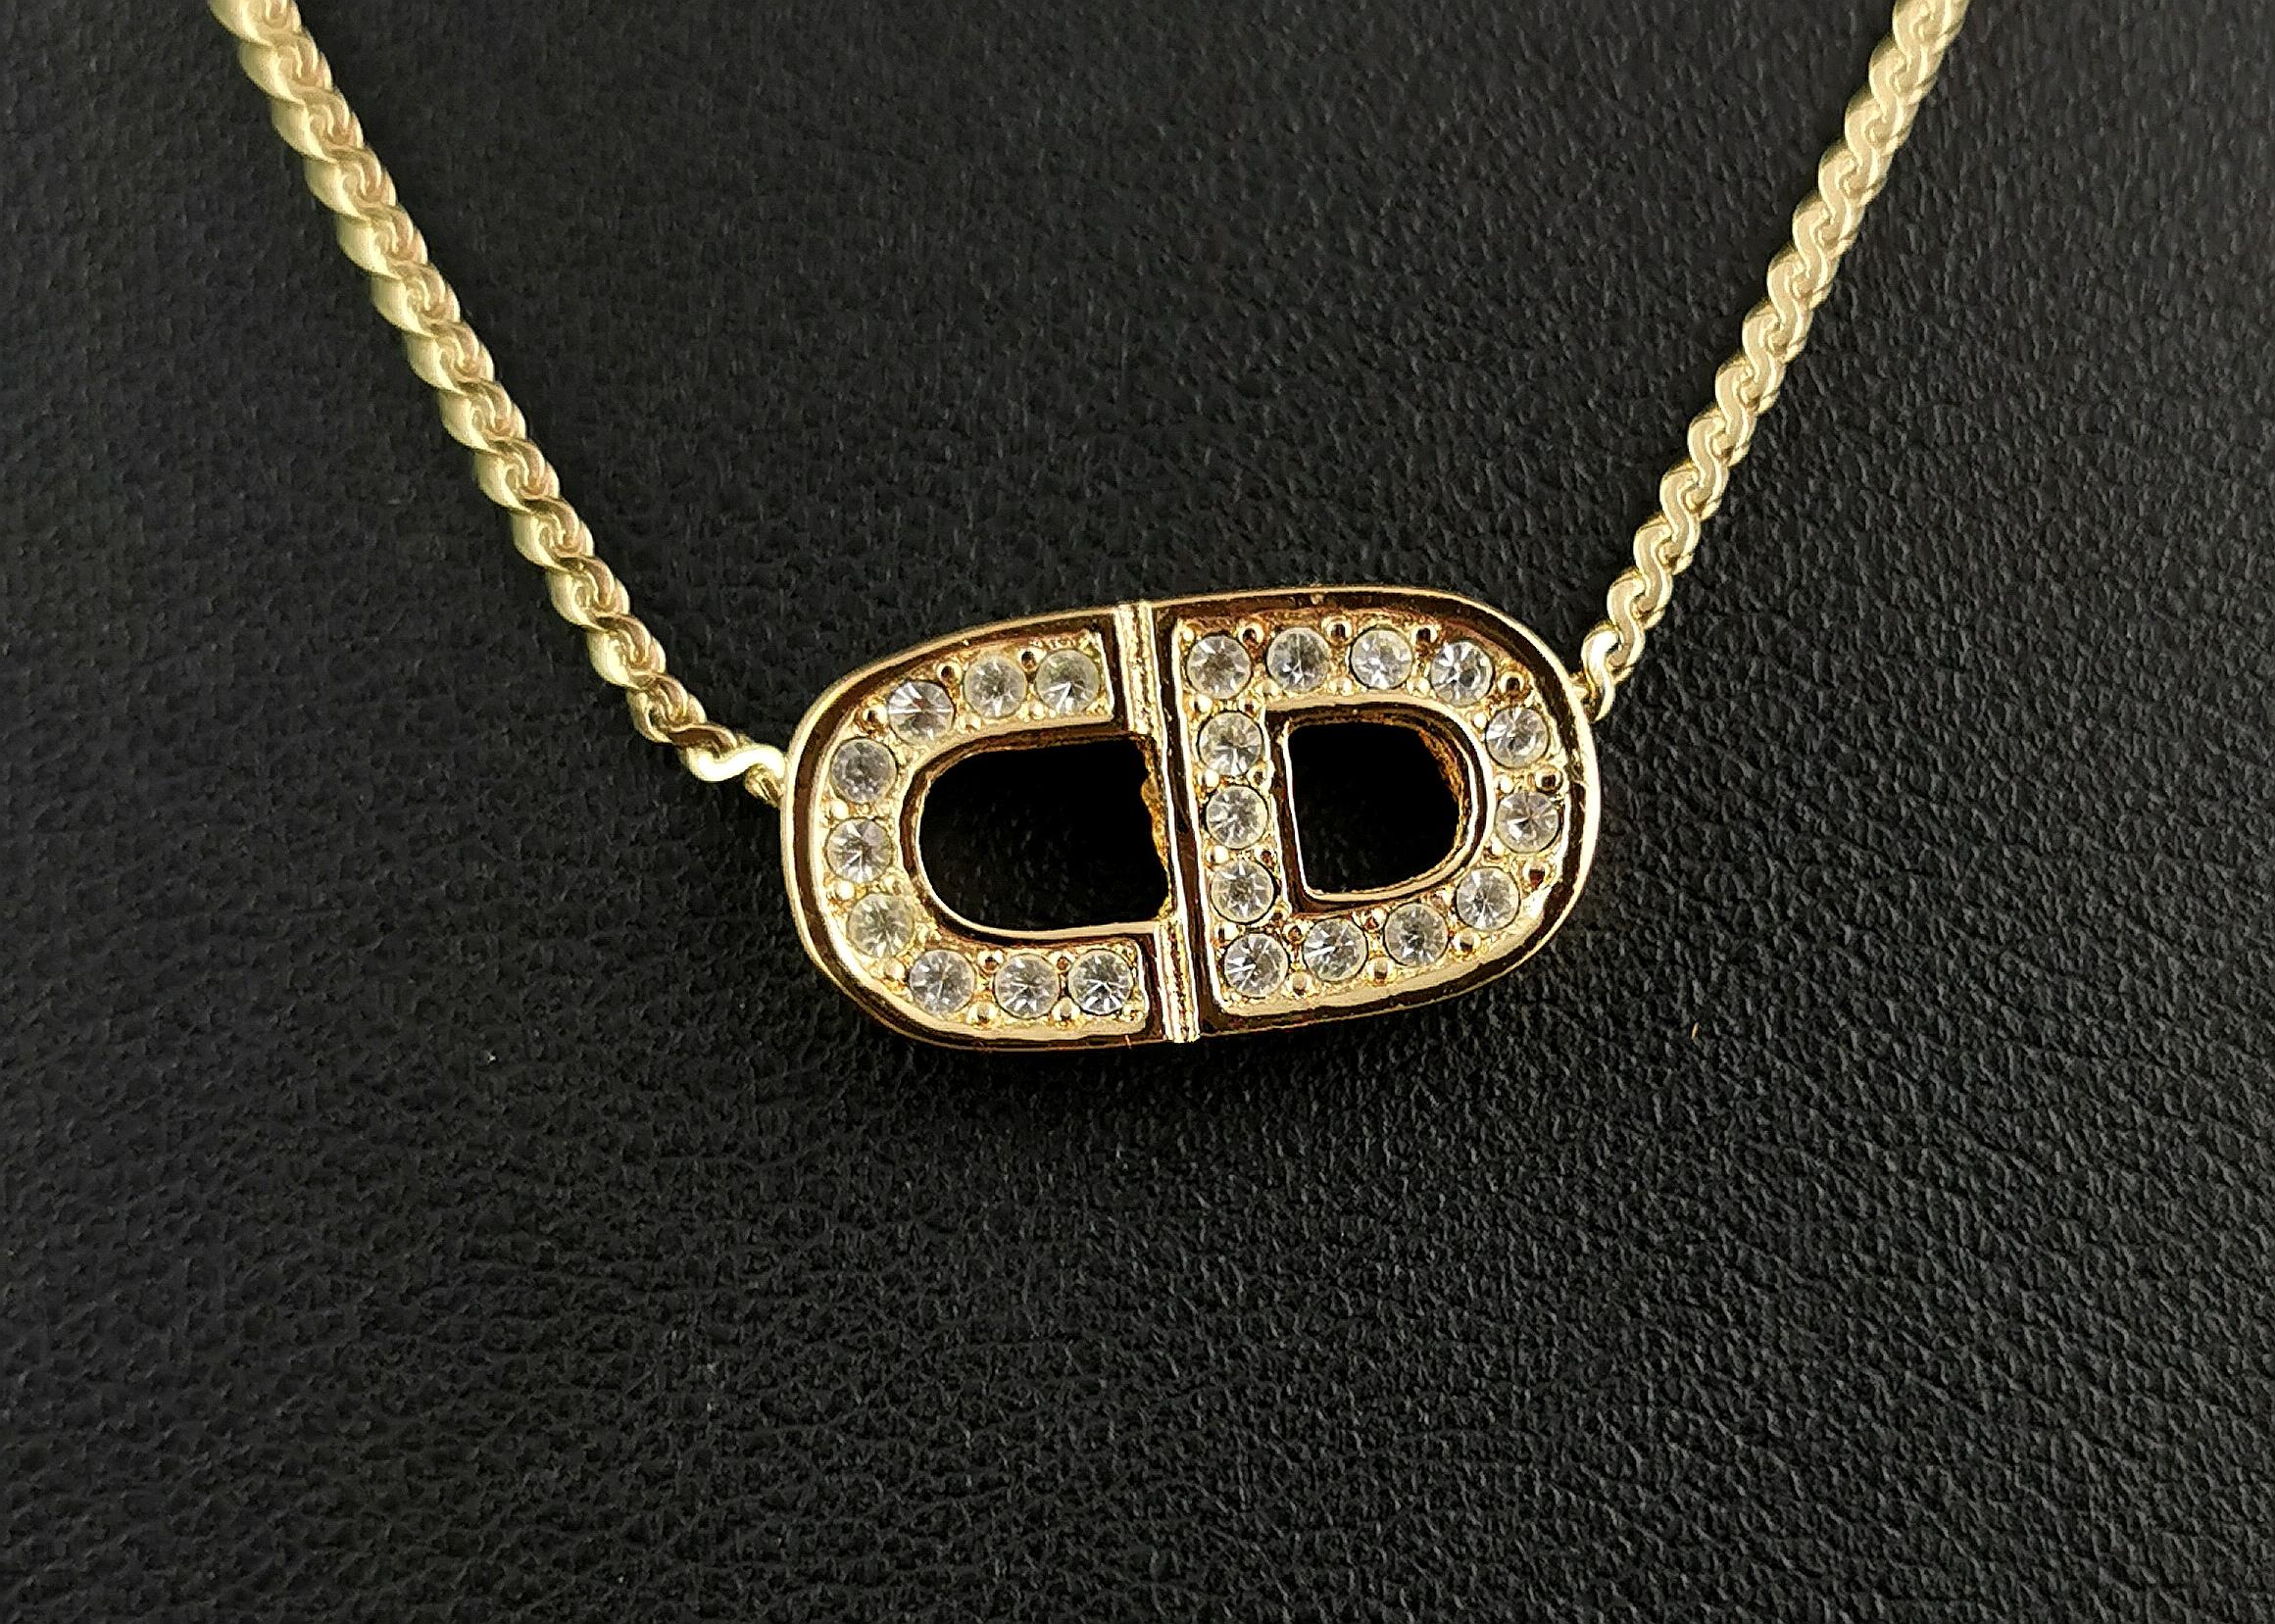 A gorgeous vintage Christian Dior logo pendant necklace.

Gold tone metal, the pendant is made up from a chunky little C and D both studded with clear diamante stones.

The pendant comes on the original Dior gold tone chain and this has a spring